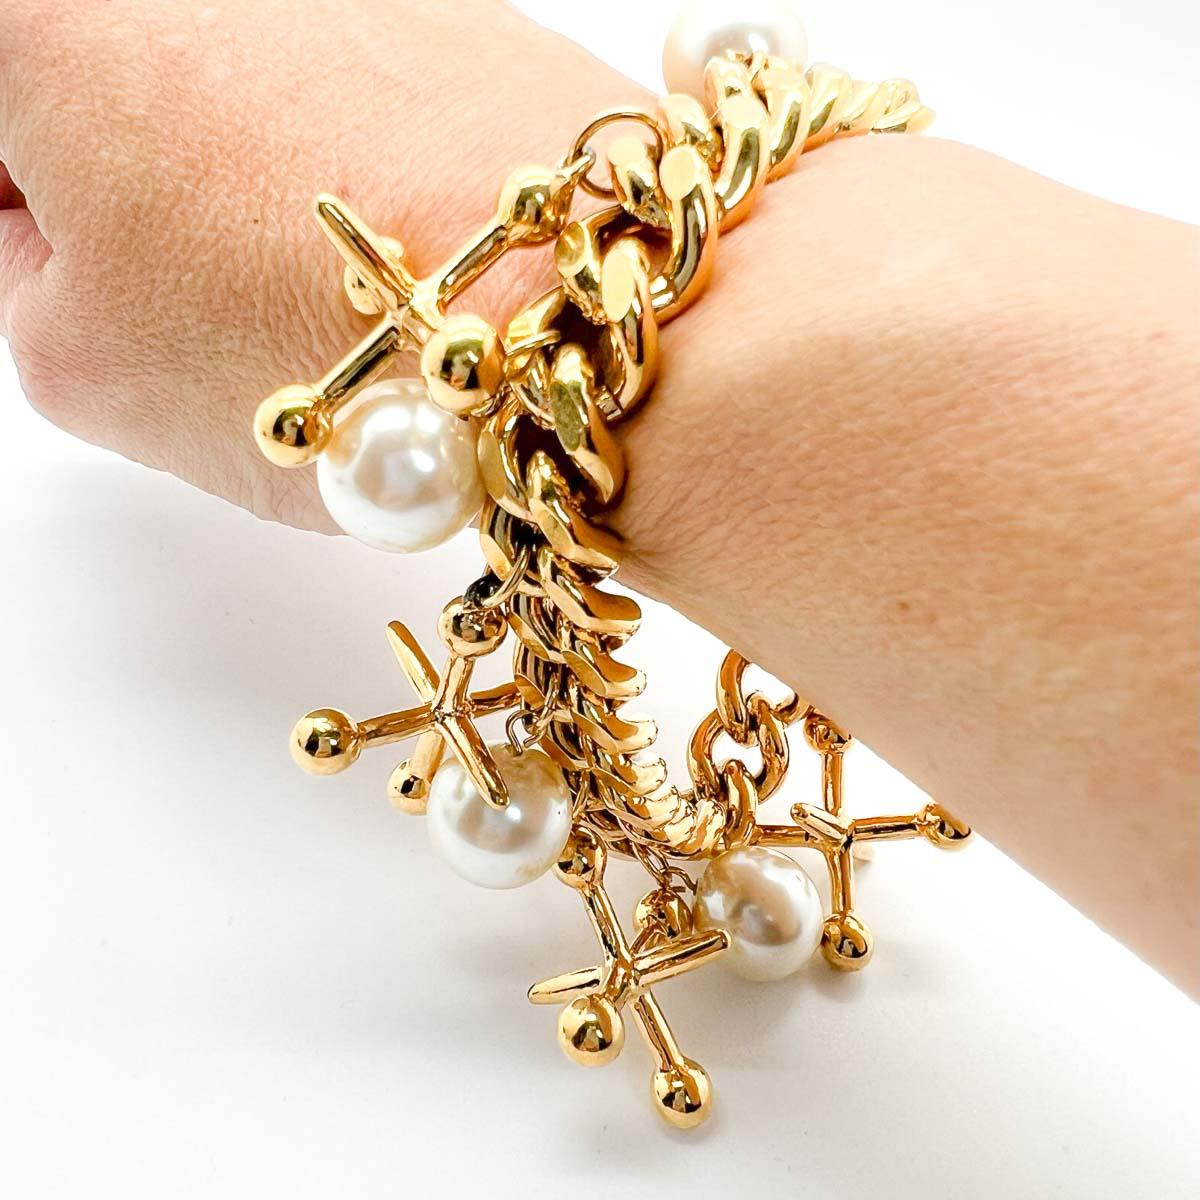 Our Jumping Jacks Charm bracelet. Playful fun abounds with a chunky chain embellished with jumping jack charms and a timeless pearl finish. A ultra cool statement piece.
Vintage Condition: Very good without damage or noteworthy wear.
Materials: Gold